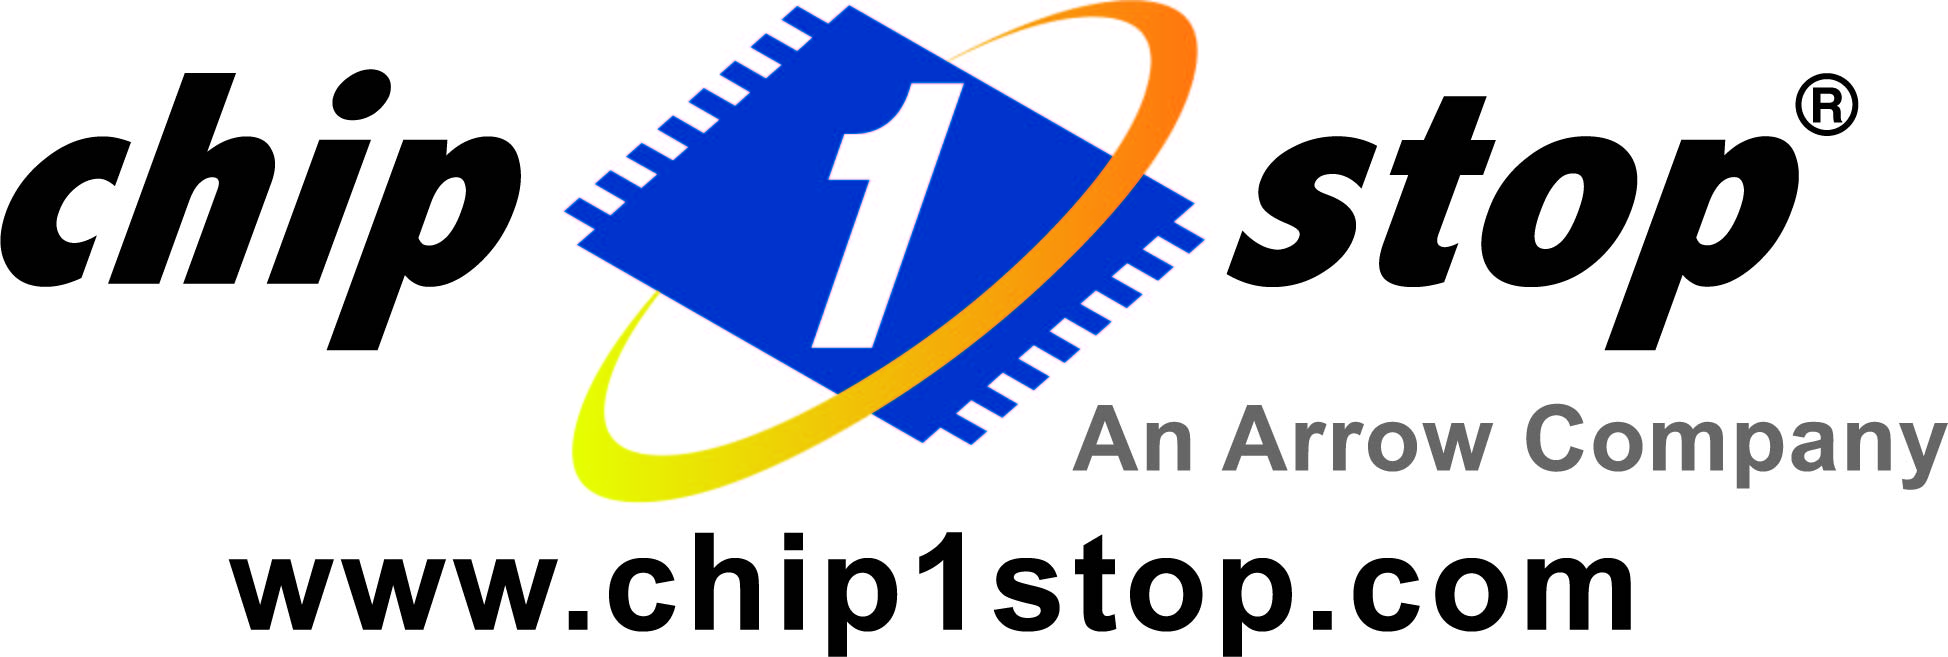 chip stop